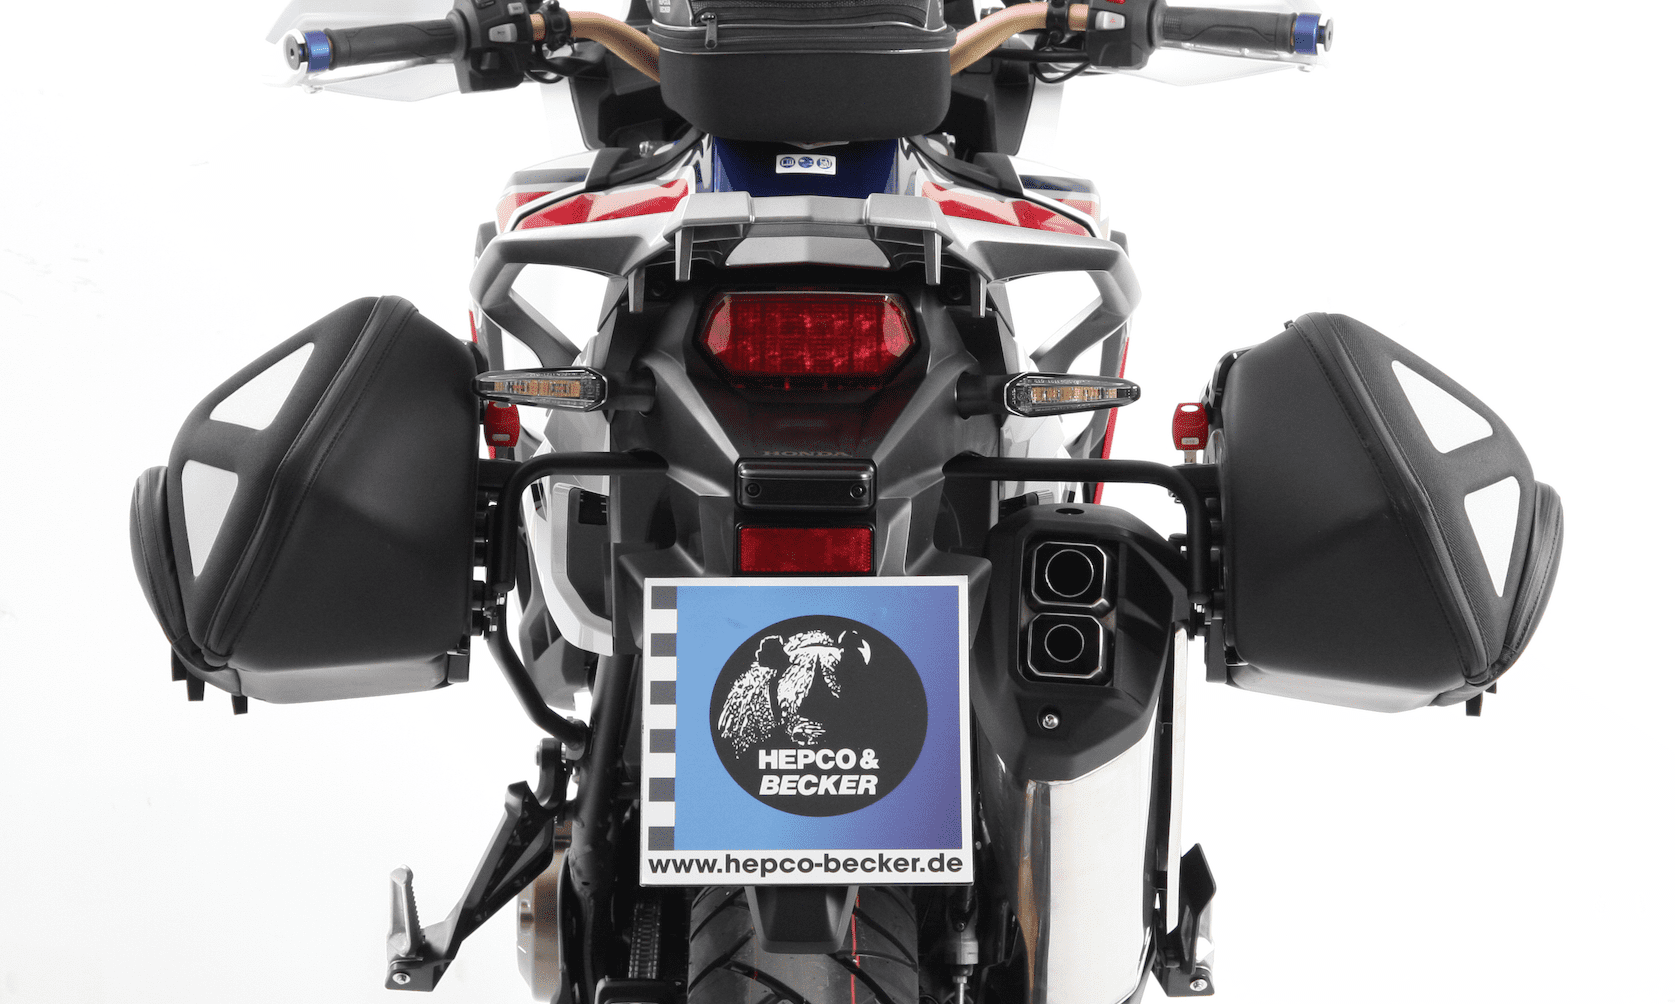 C-Bow sidecarrier black for Honda CRF 1000 Africa Twin (2016-2017)